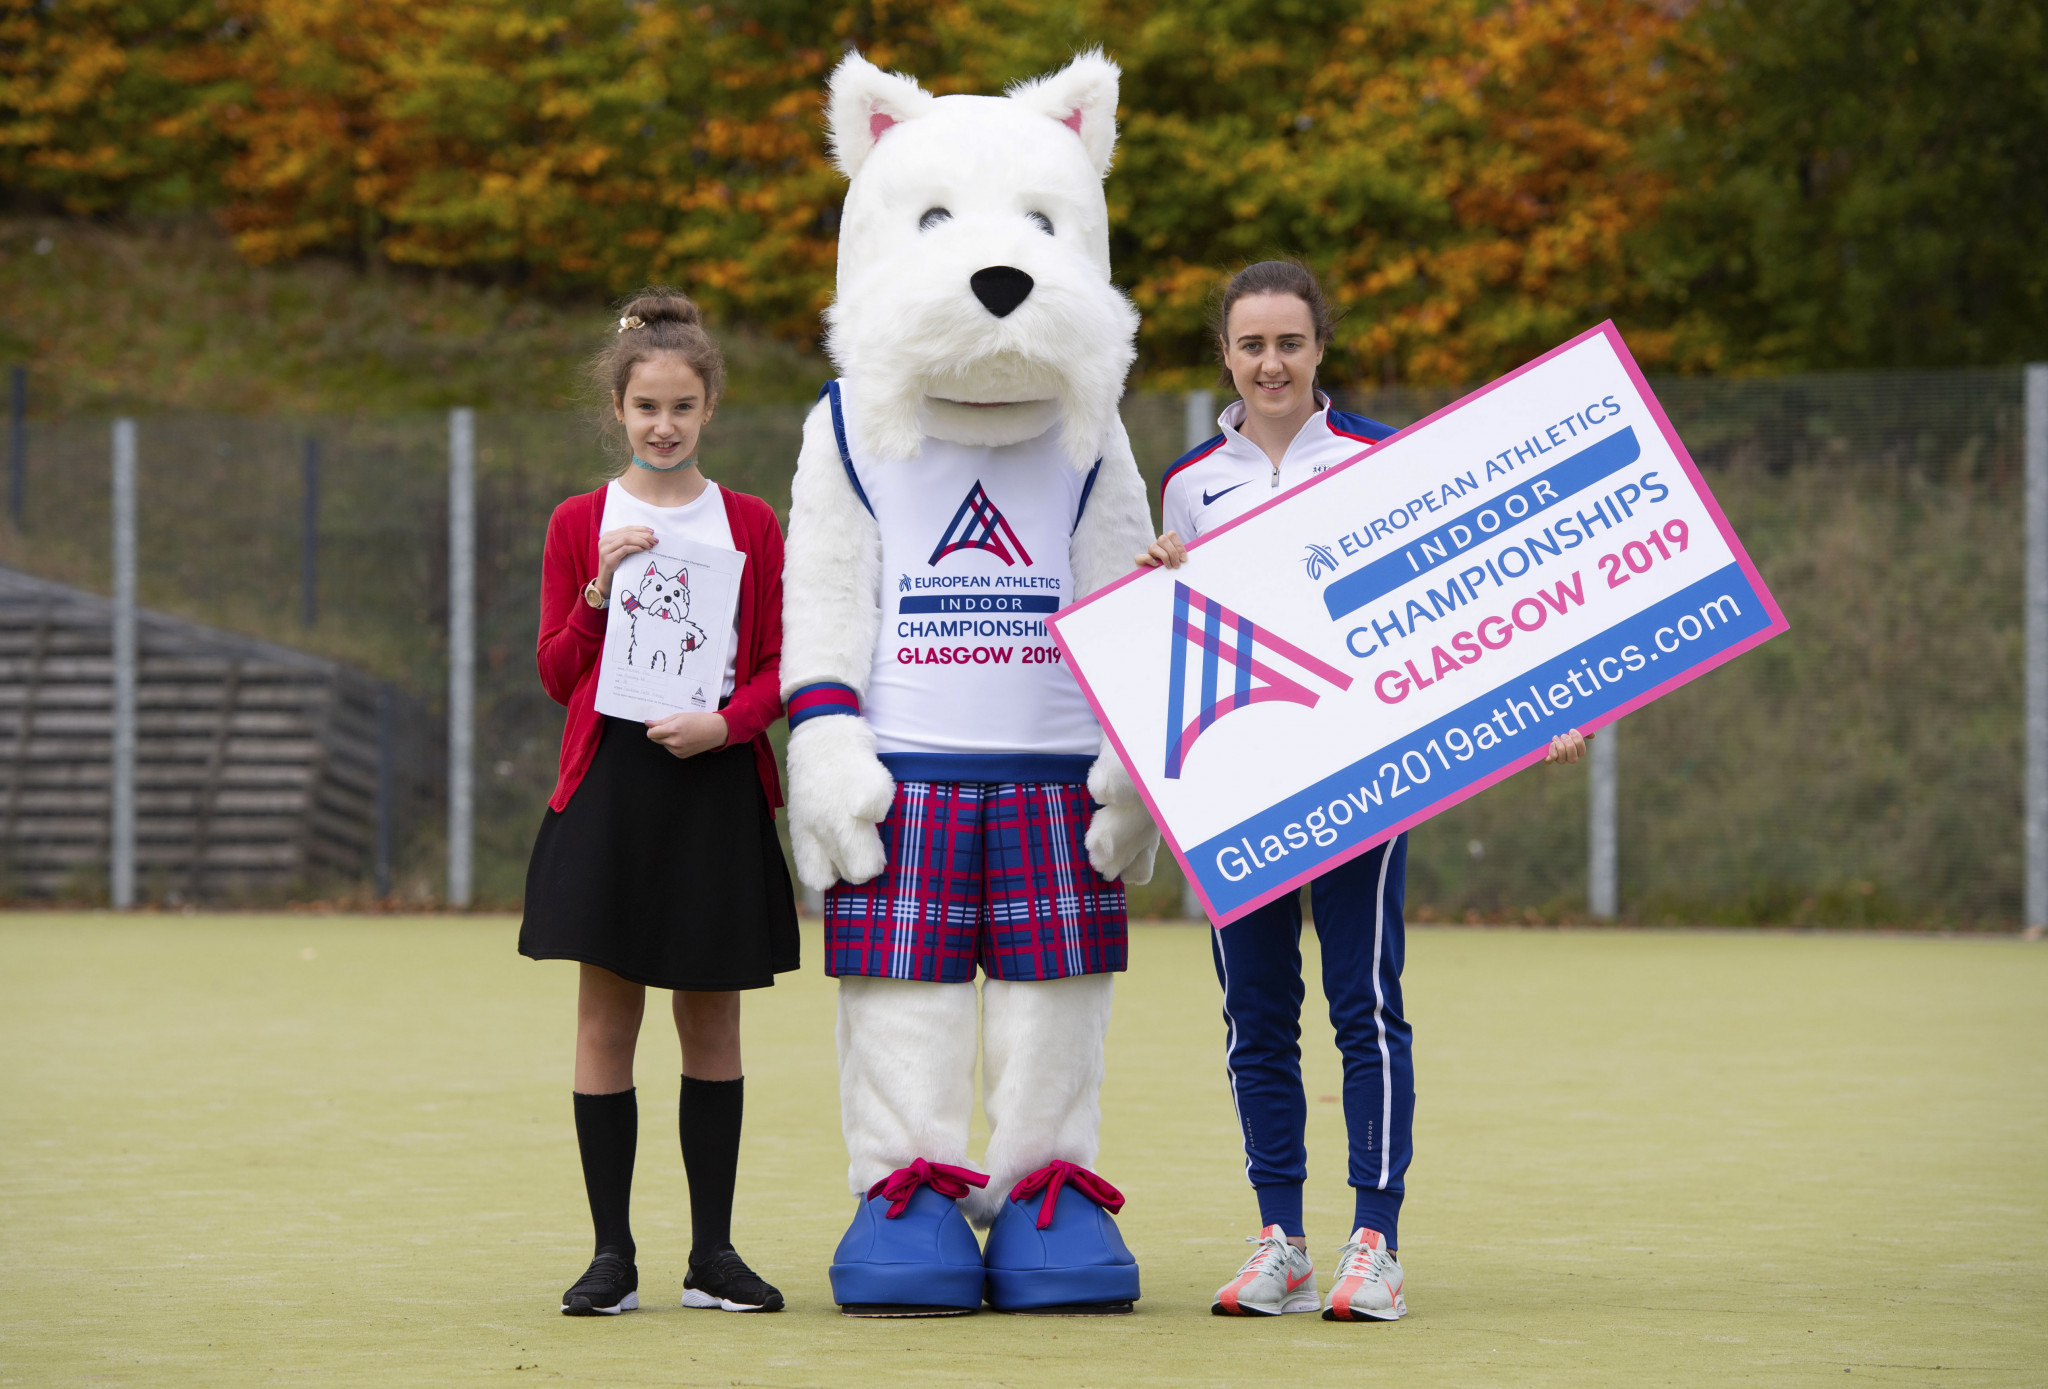 Scottee the Scottie dog, designed by Rachael Joss, has been unveiled as the mascot for the European Athletics Indoor Championships Glasgow 2019 ©European Athletics Indoor Championships Glasgow 2019 